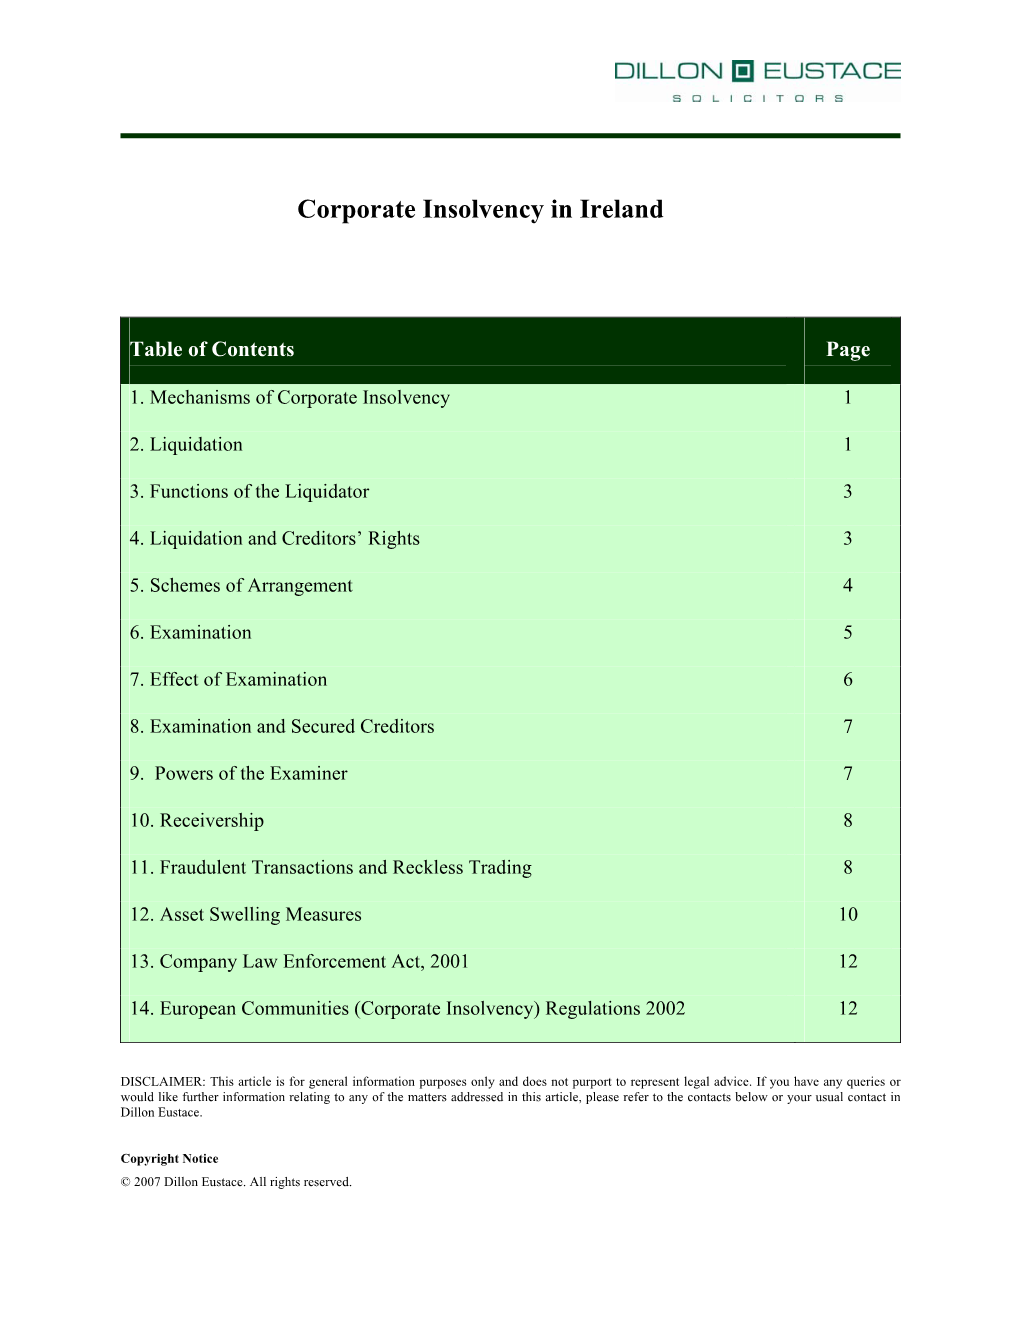 Corporate Insolvency in Ireland